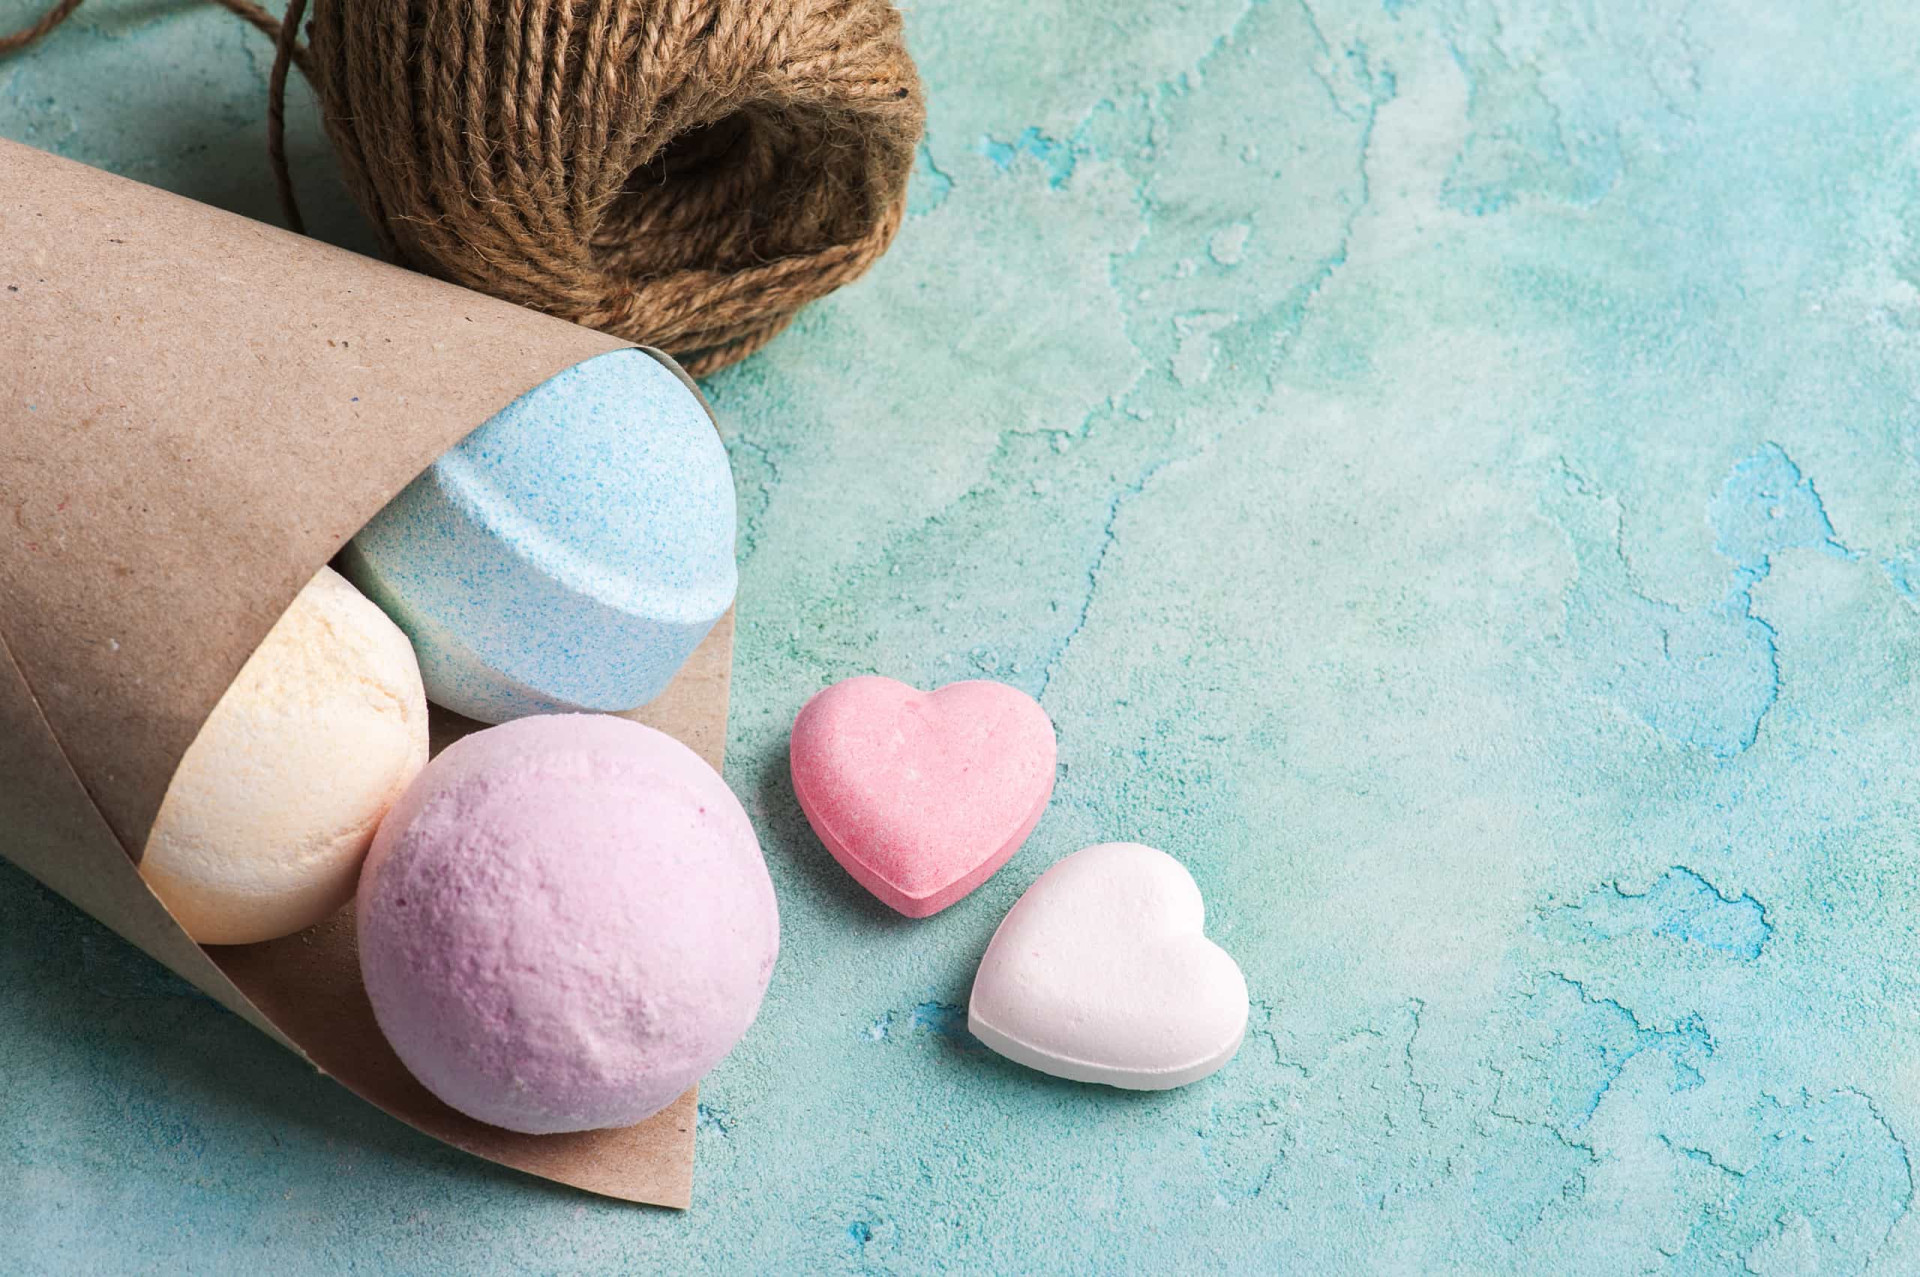 <p><span>You don’t have to stop at salts and oils, either. If it’s bubble bath or even bath bombs you like, go for it. If you suffer with dry skin, consider bath milk, as this will moisturize your skin.</span></p><p>You may also like:<a href="https://www.starsinsider.com/n/236449?utm_source=msn.com&utm_medium=display&utm_campaign=referral_description&utm_content=494861en-en"> Did you know that many of your favorite characters are played by LGBT actors?</a></p>